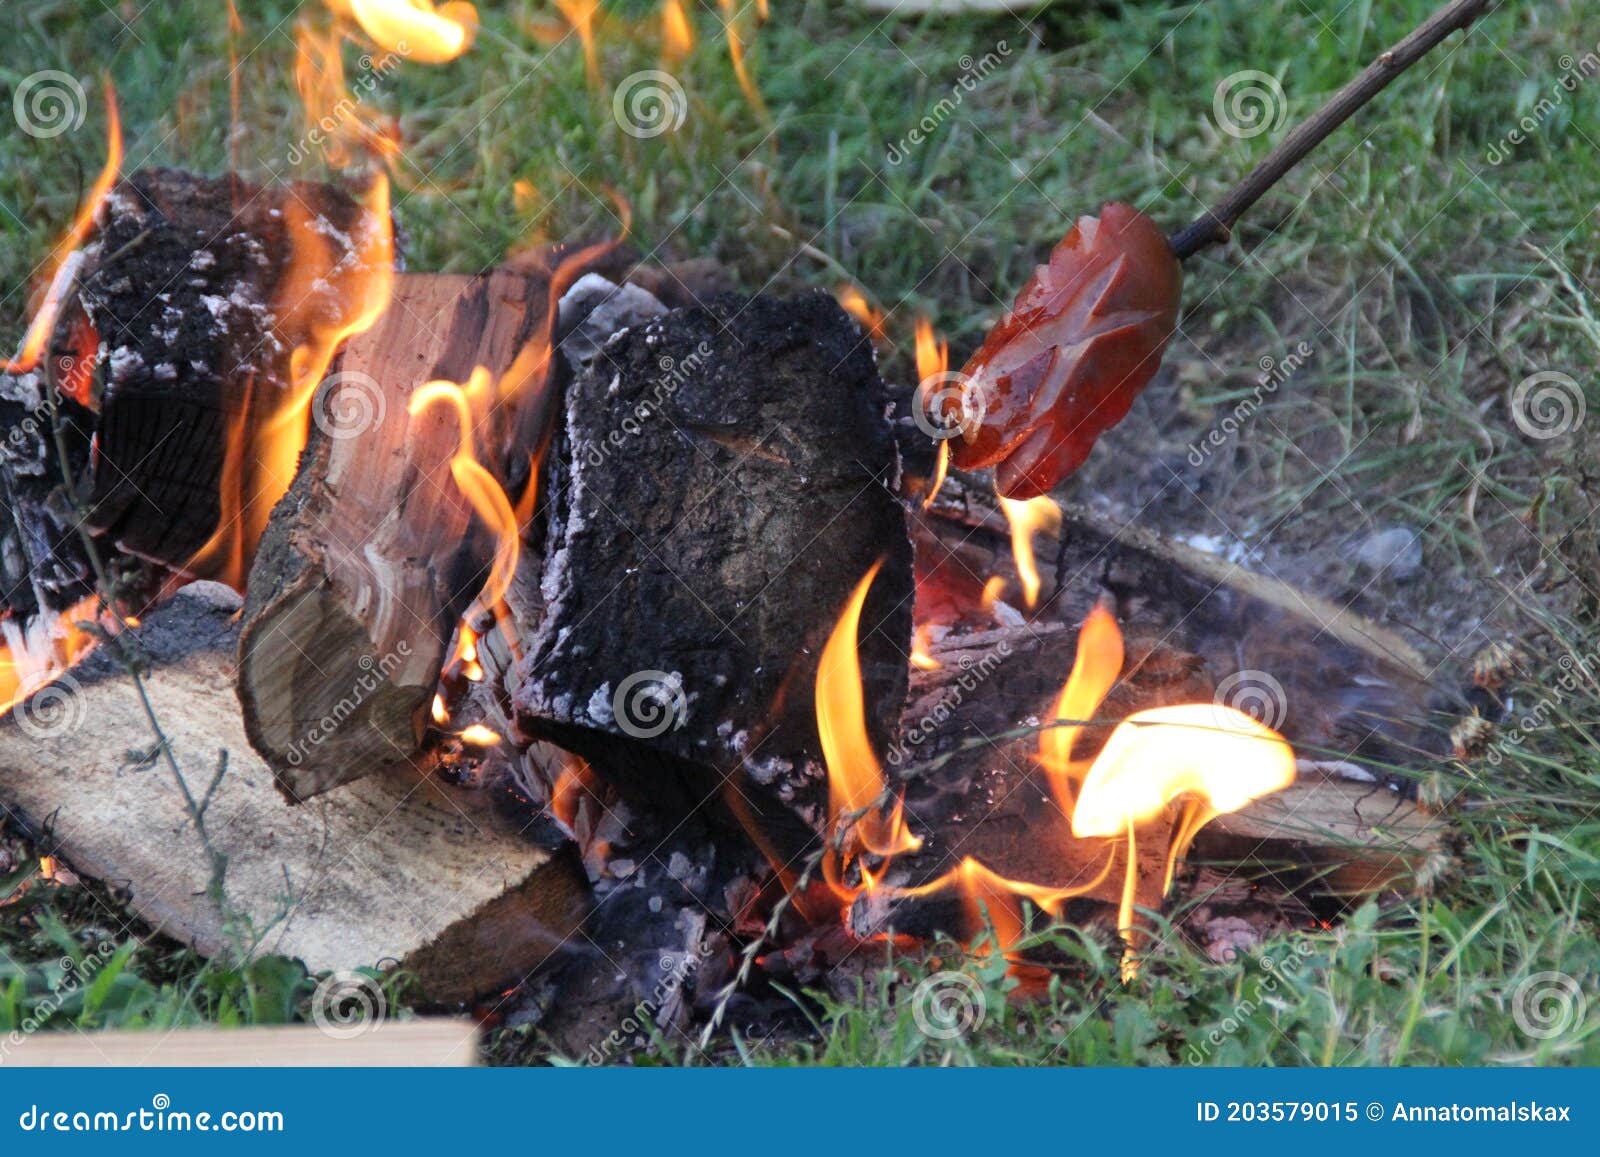 A Fire, Burning Wood and Embers, Charred Wood Stock Image - Image of ...